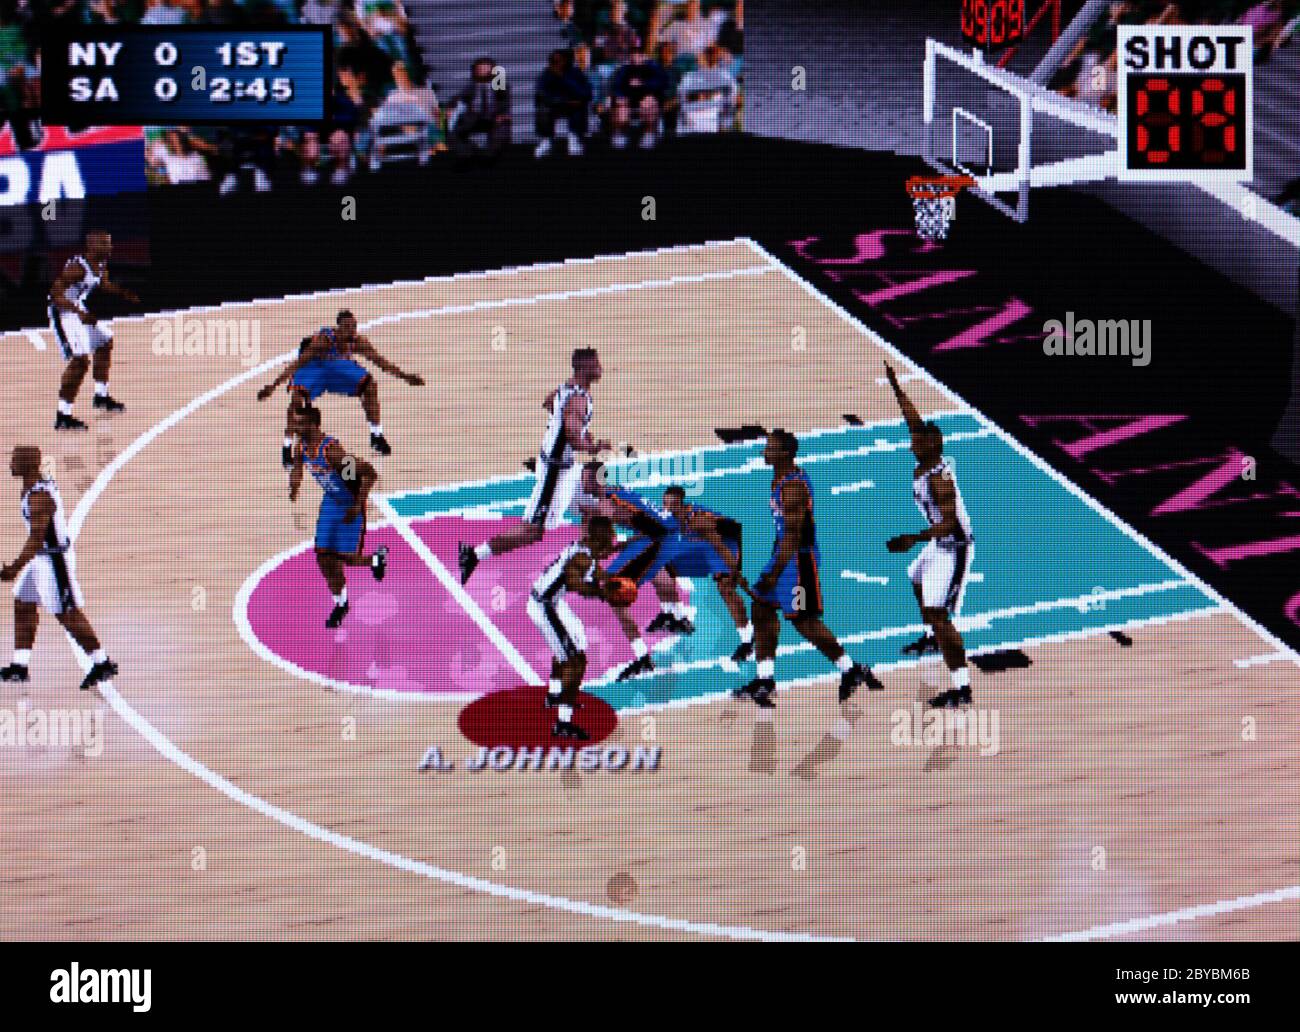 NBA Live 2000 - Nintendo 64 Videogame - Editorial use only Stock Photo